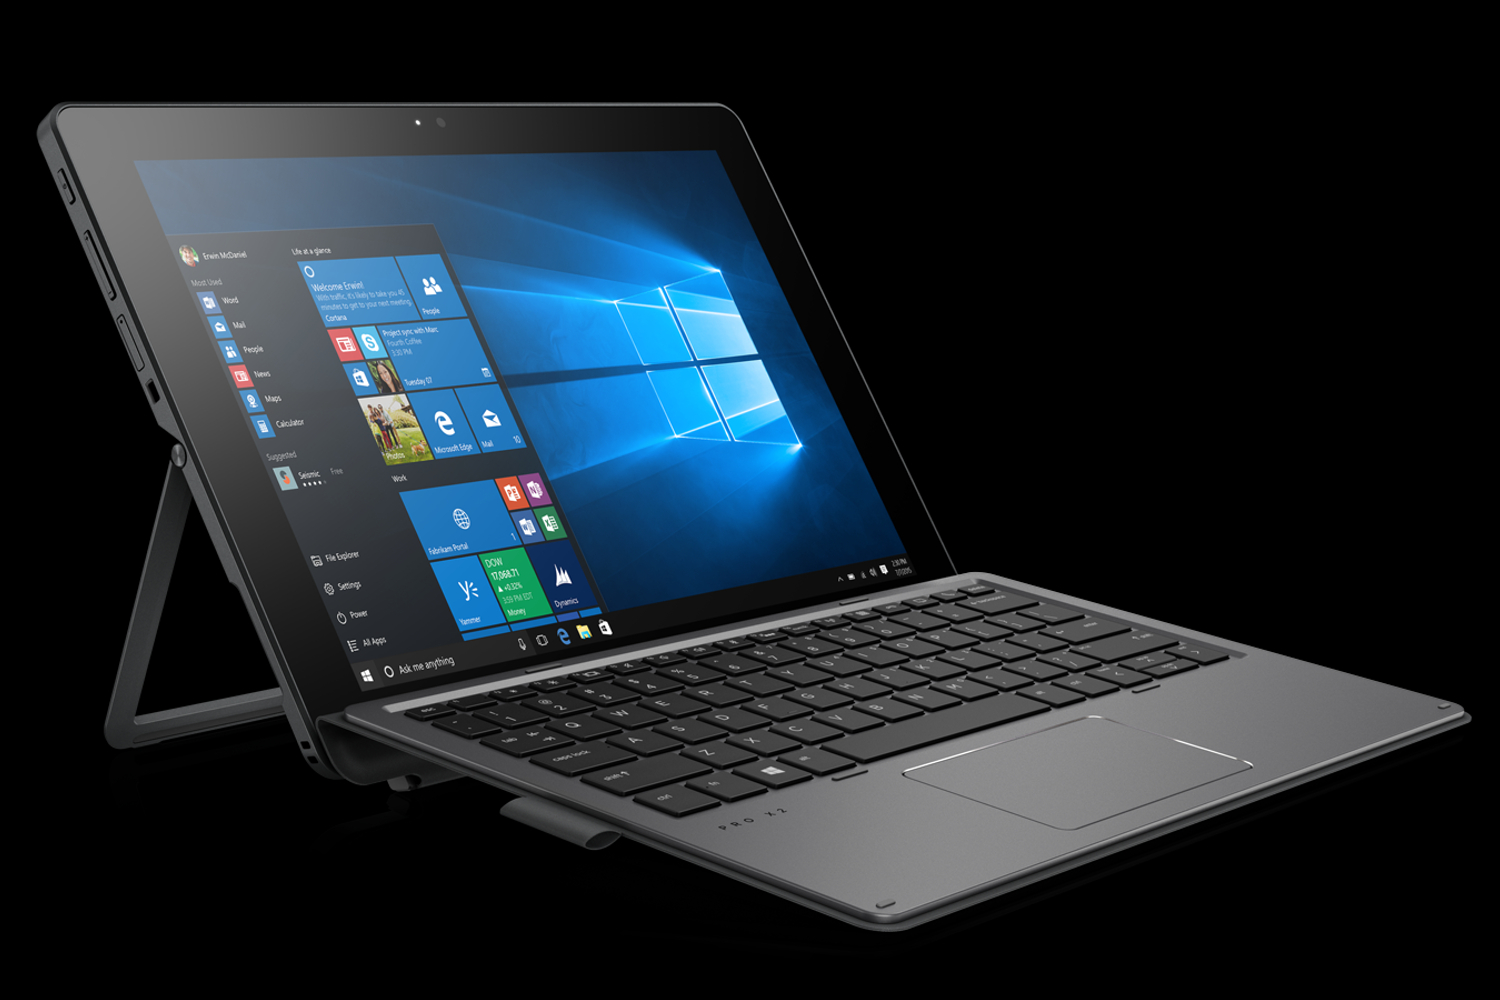 HP Launches Pro x2 612 G2 2-in-1 PC, Peripherals, Accessories, And 